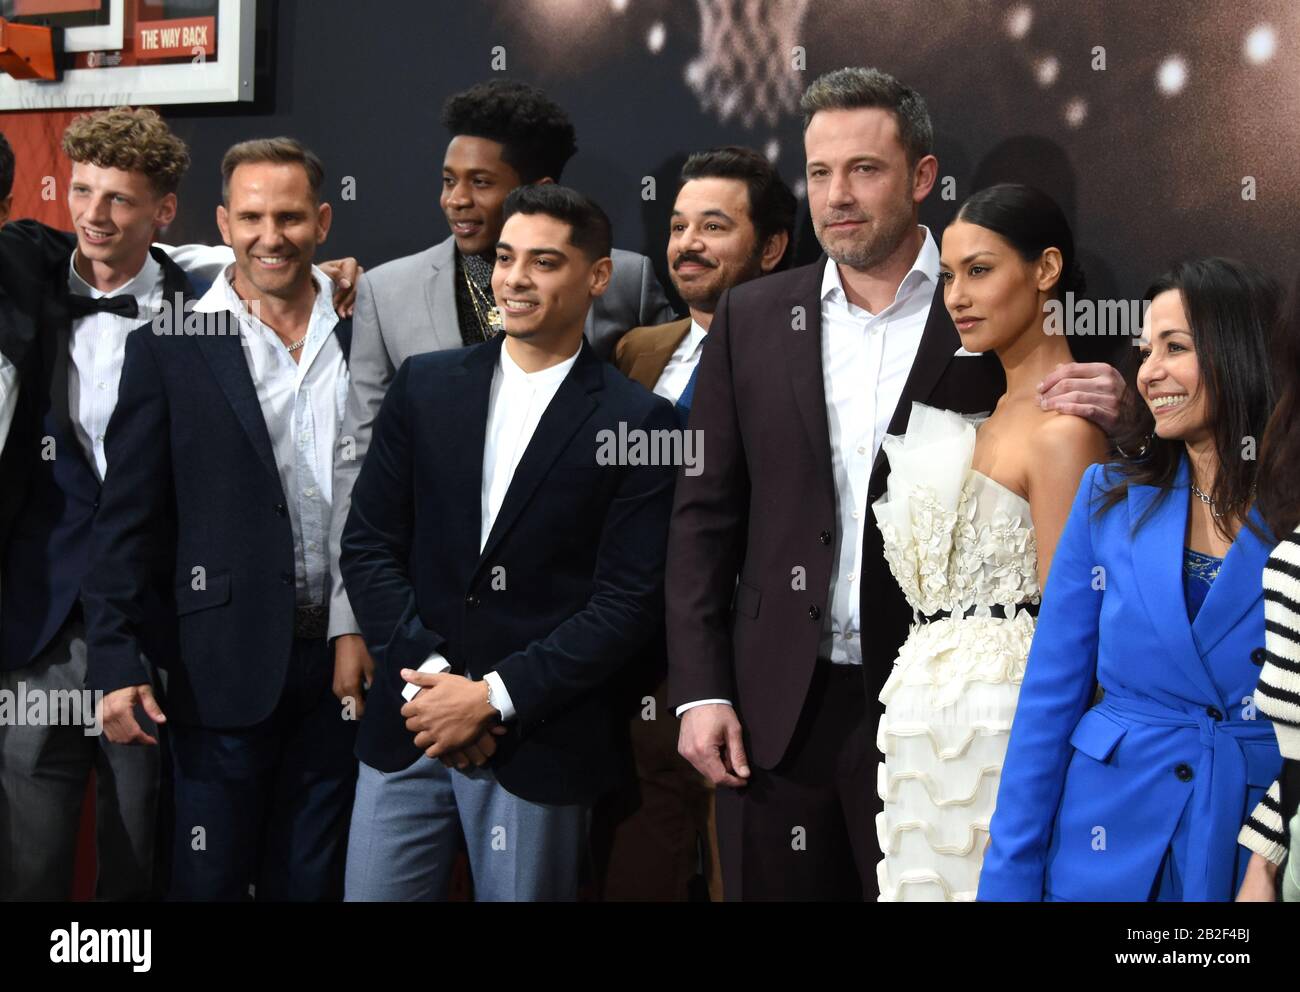 Los Angeles, California, USA 1st March 2020 (L-R) Actor Tyler O'Malley, actor Chris Bruno, actor Melvin Gregg, actor Fernando Luis Vega, actor Al Madrigal, actor Ben Affleck, and actress Janina Gavankar attend Warner Bros. Pictures 'The Way Back' World Premiere on March 1, 2020 at Regal LA Live in Los Angeles, California, USA. Photo by Barry King/Alamy Stock Photo Stock Photo